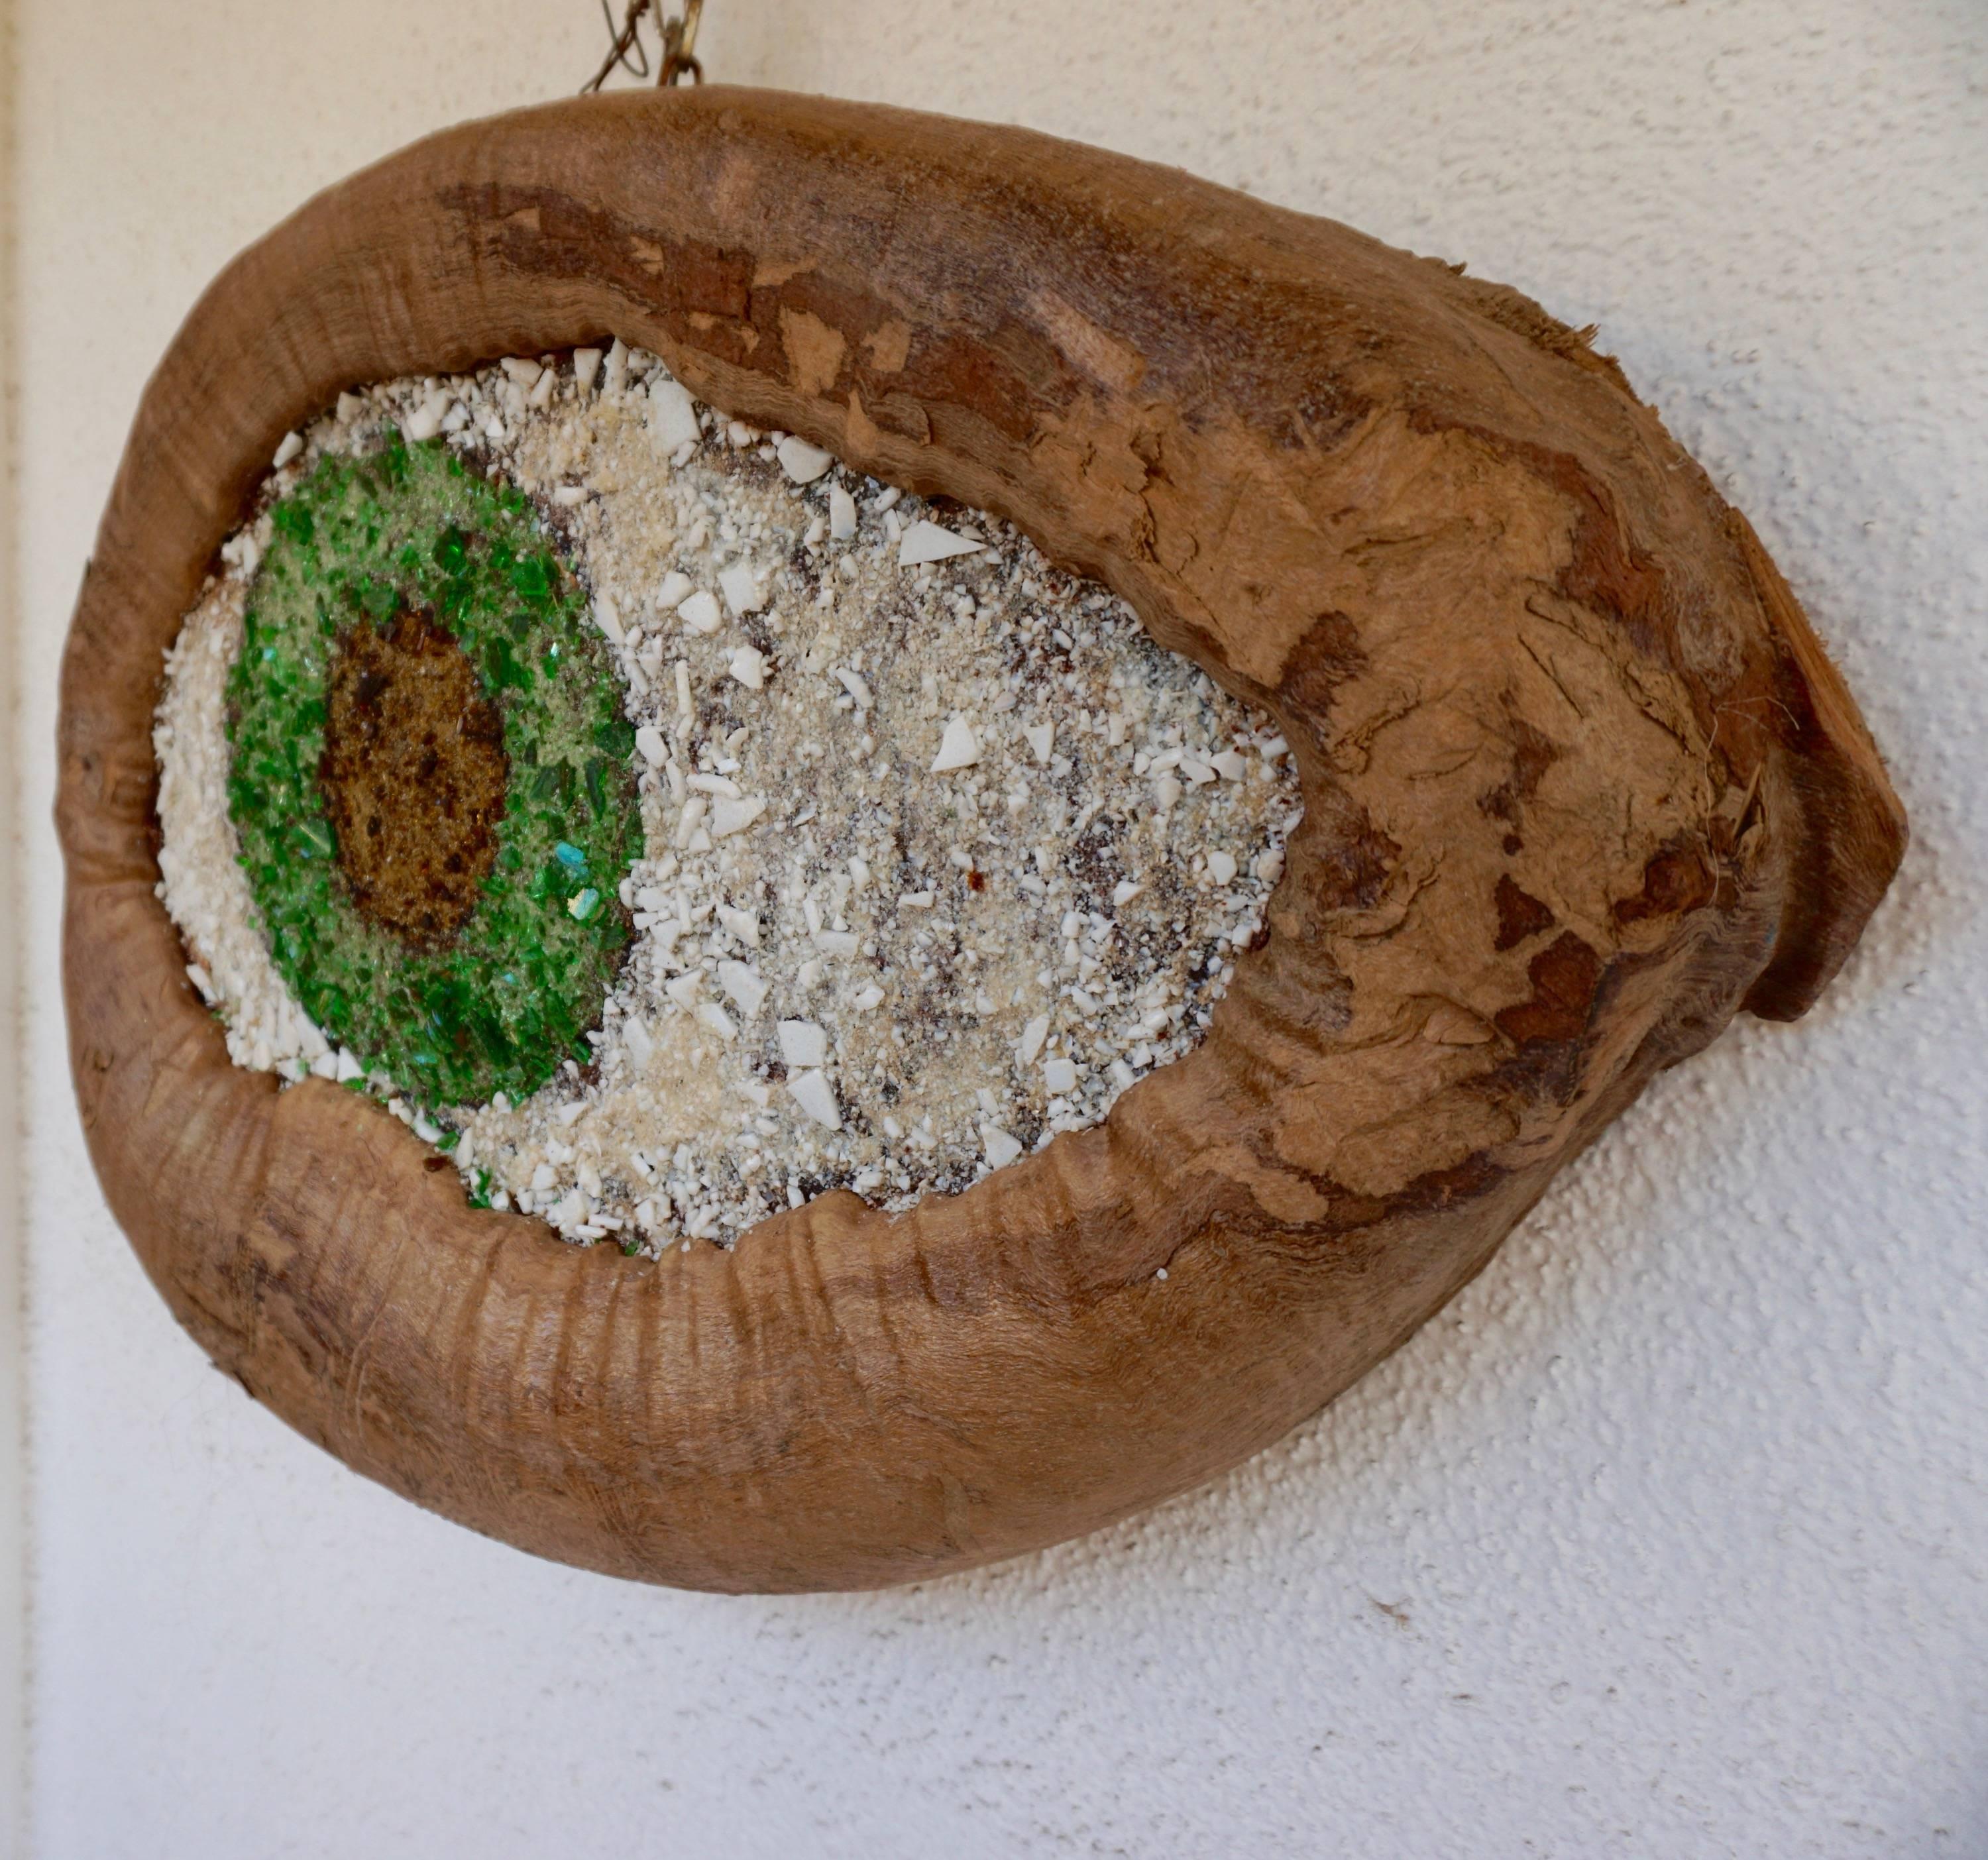 Weird wall-mounted eyeball sculpture comprised of driftwood and different colored glass glued to board.